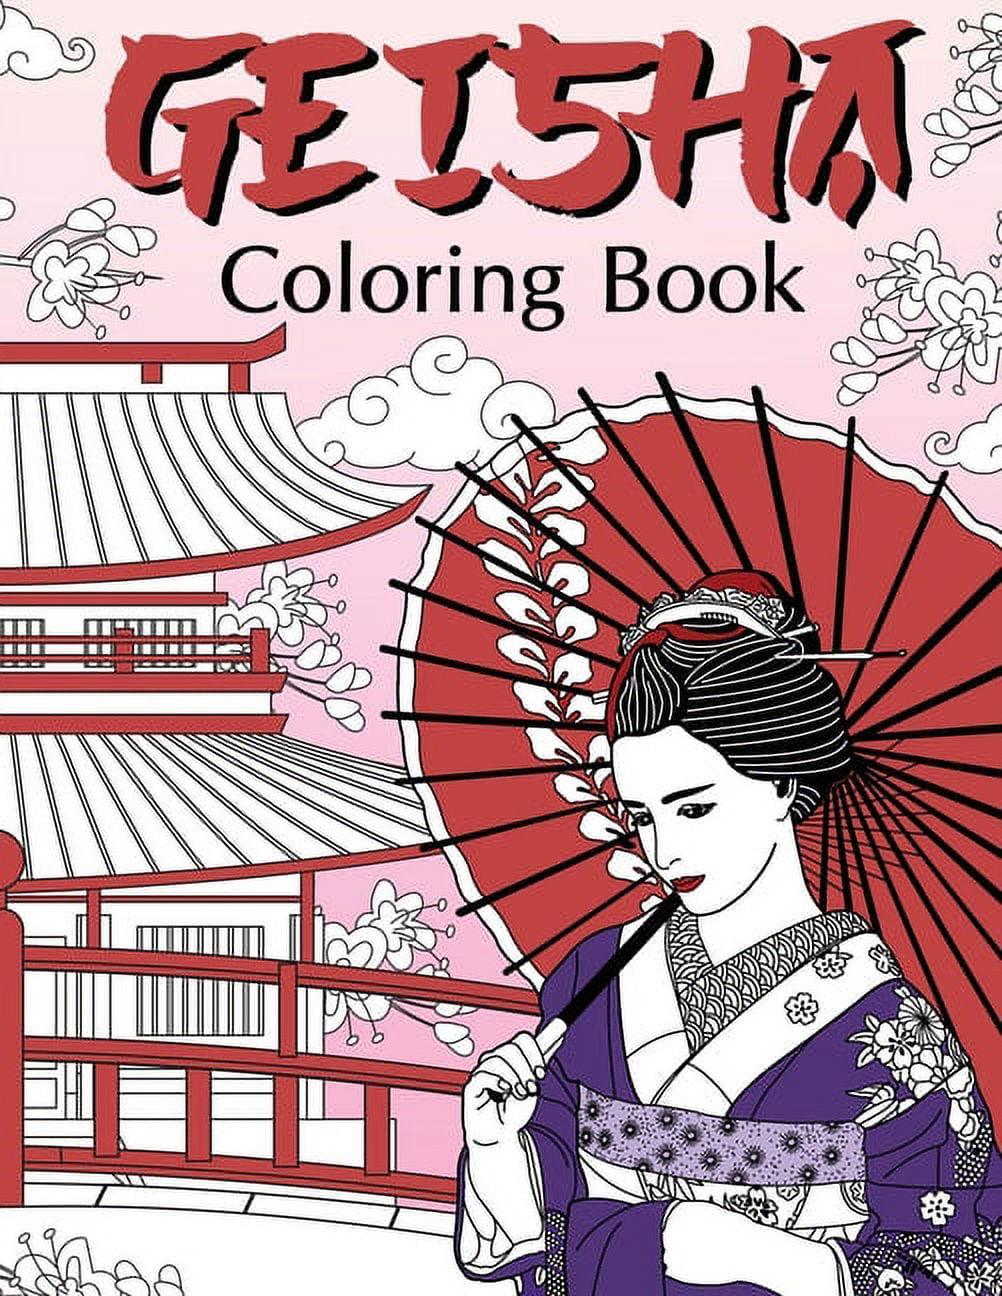 Geisha Adults Coloring Book: beautiful Japanese women gift Japan for adults  relaxation art large creativity grown ups coloring relaxation stress re  (Paperback)